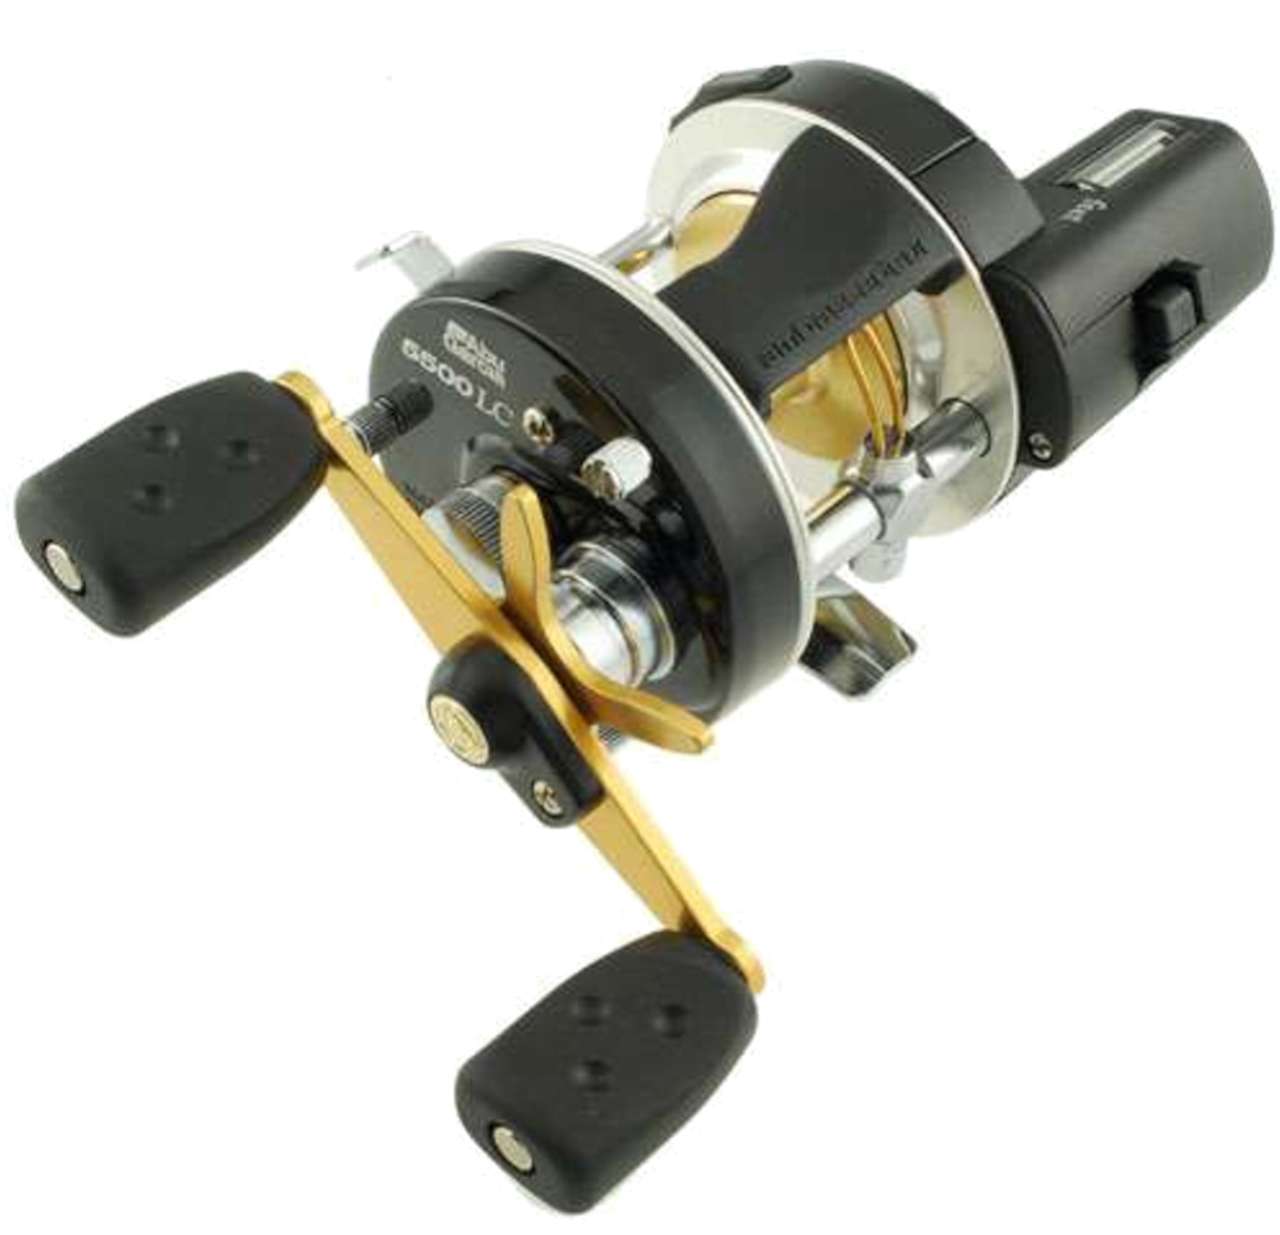 Best Line Counter Reels Reviewed In 2022 - Precision Trolling 